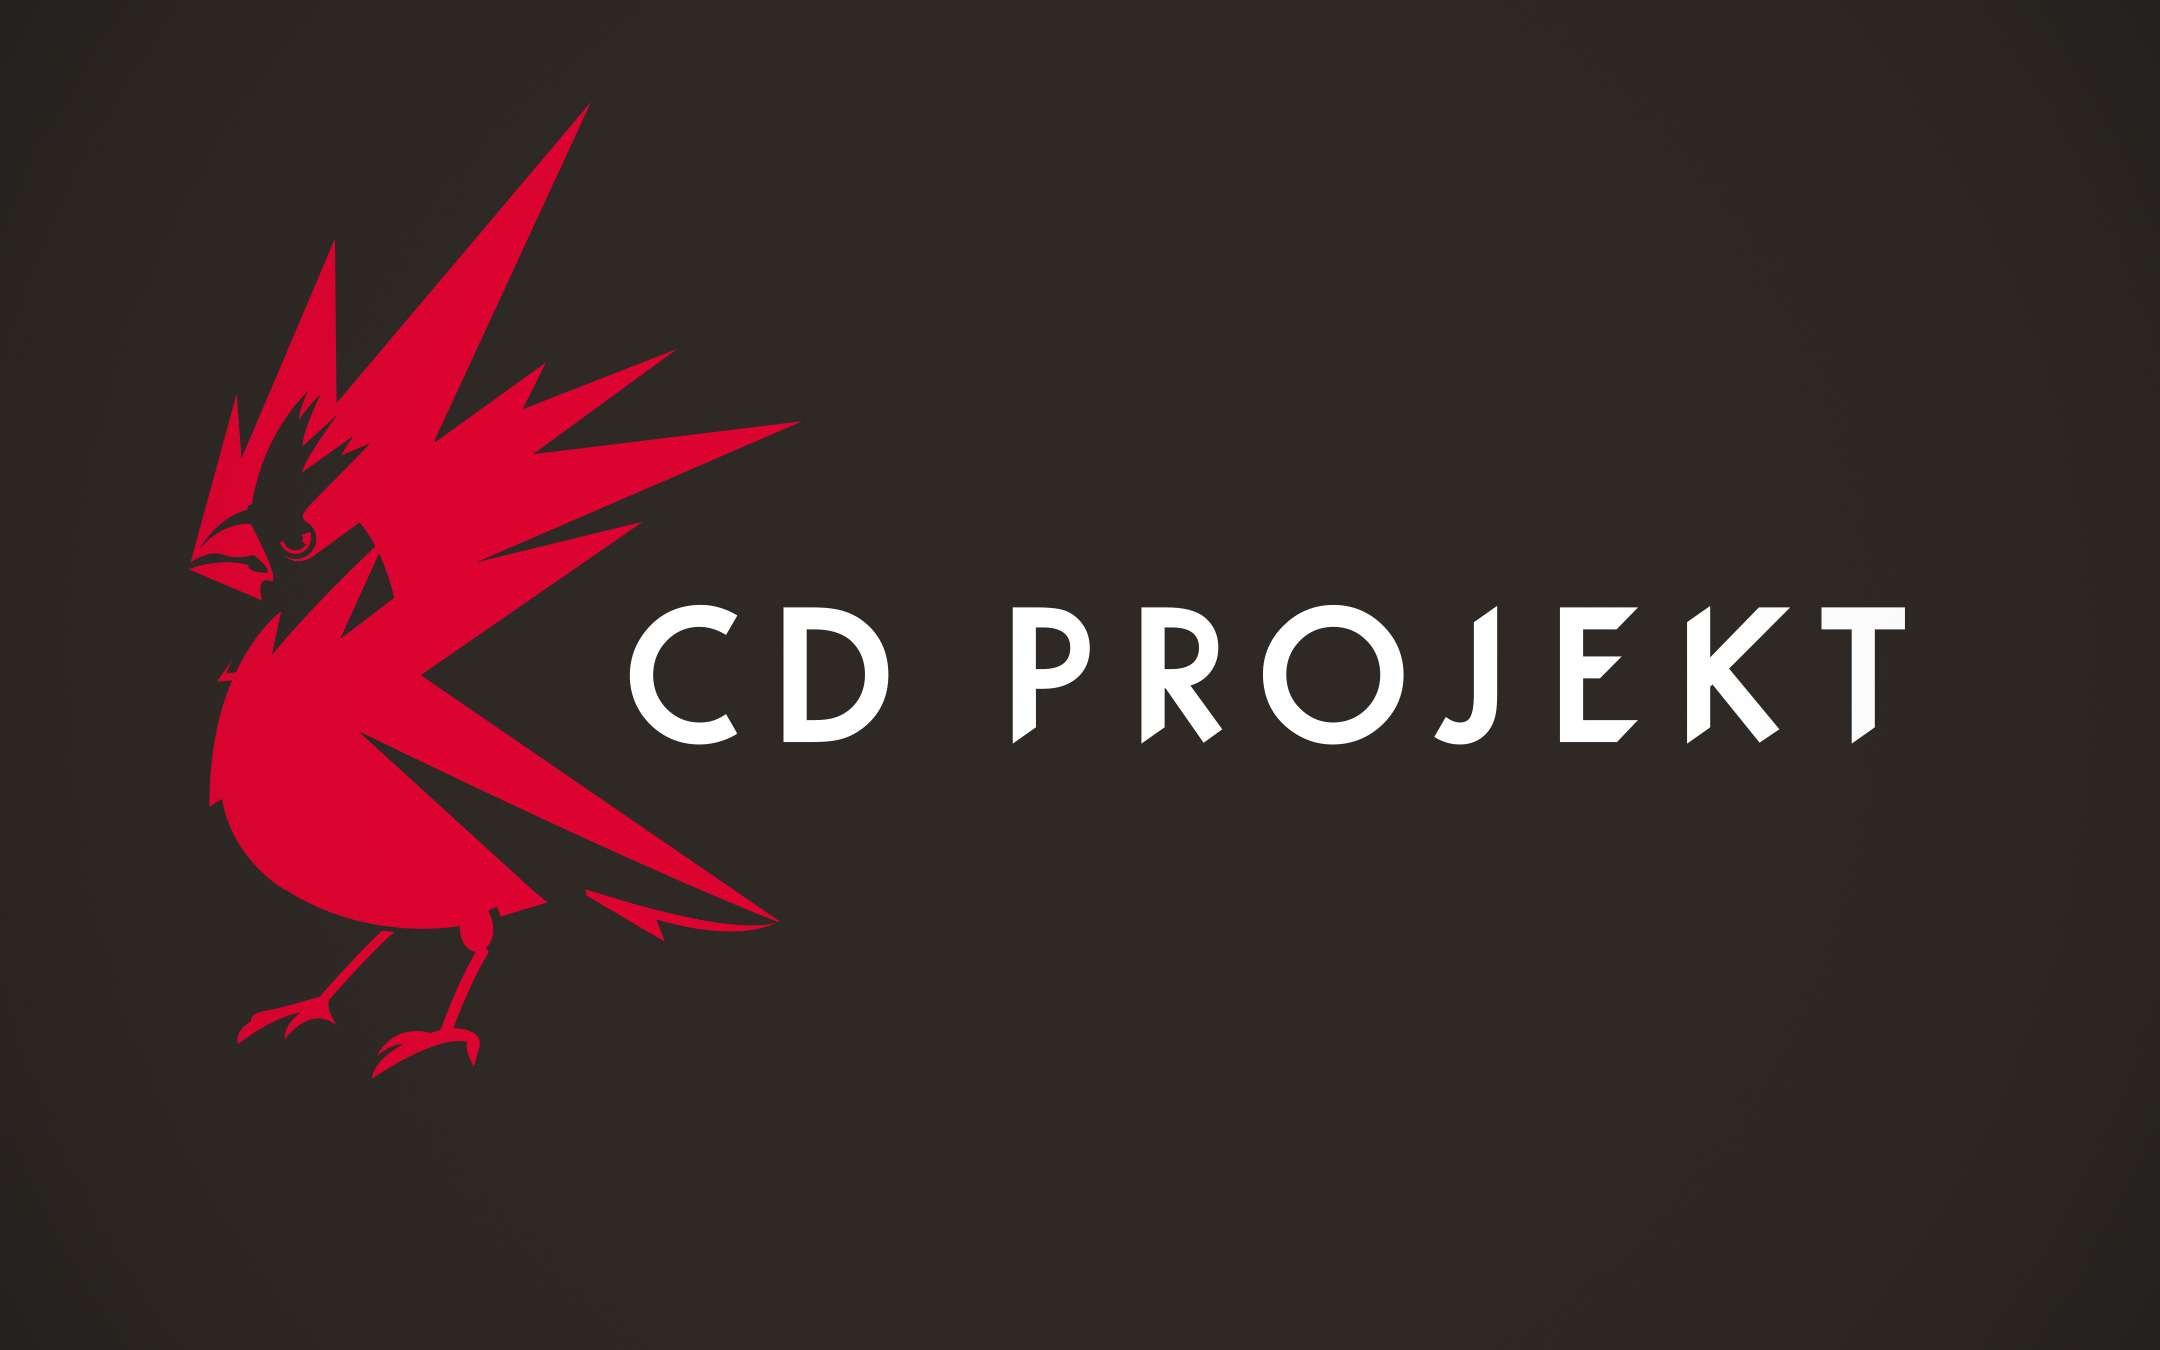 CD Projekt RED hit by ransomware attack